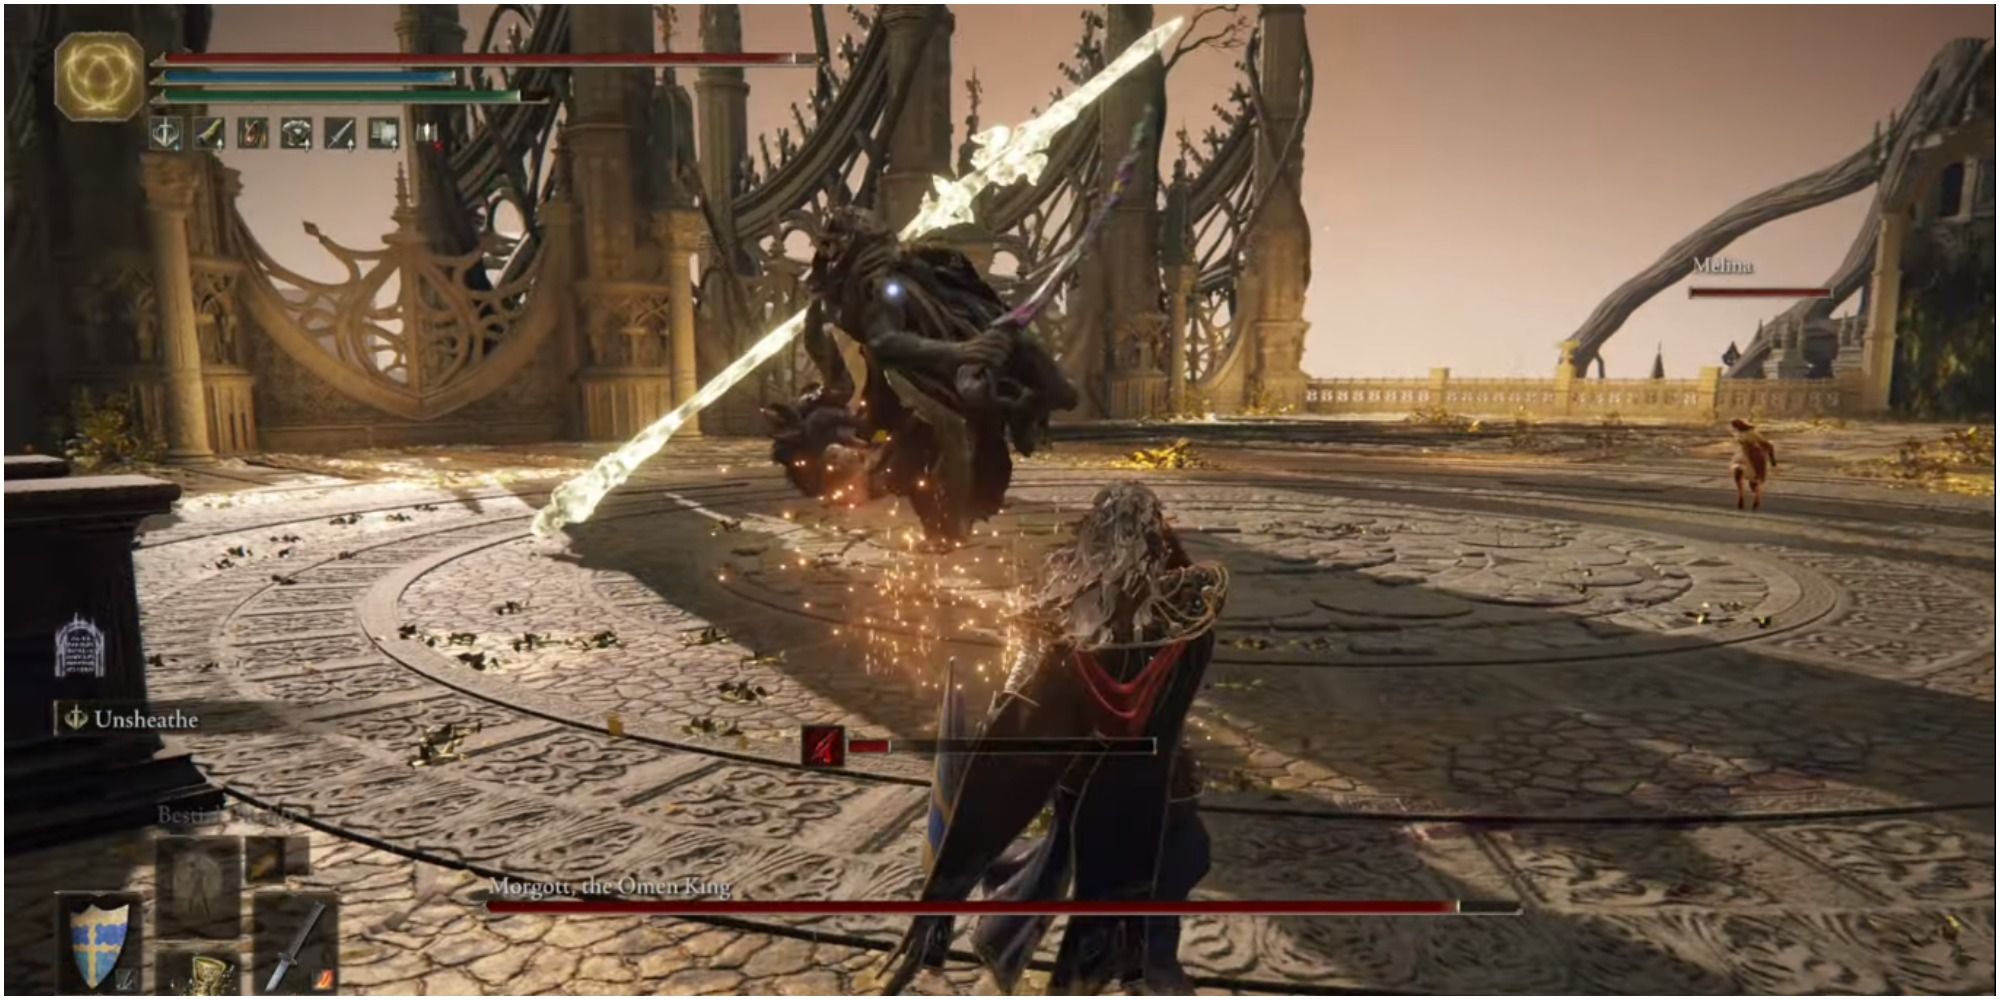 The boss throwing a holy spear at the player.